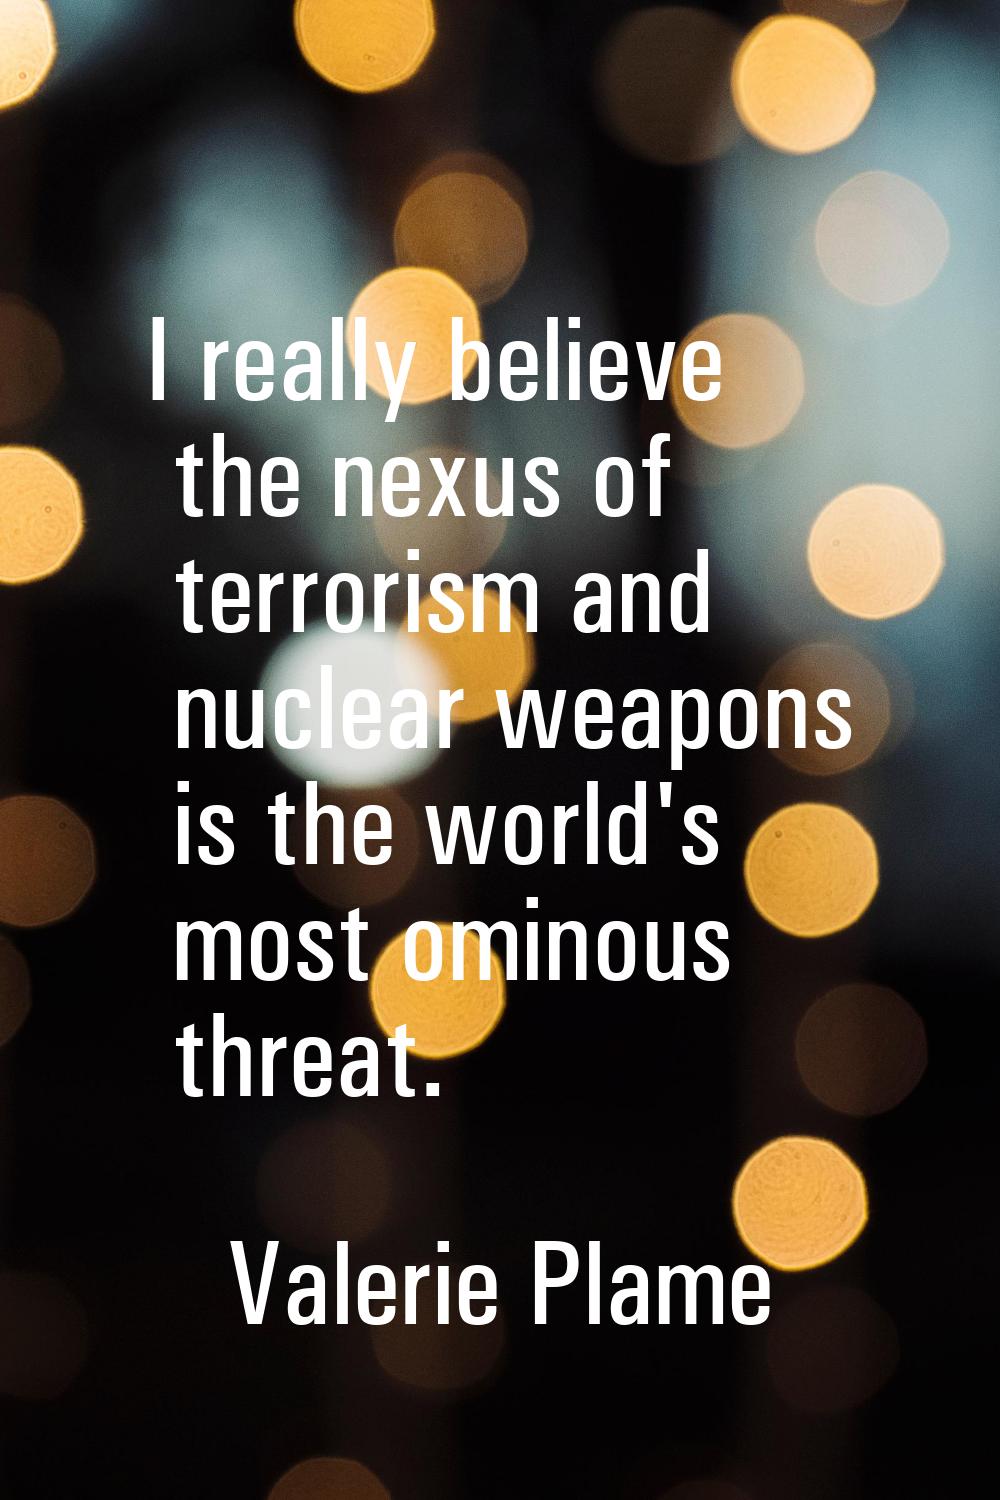 I really believe the nexus of terrorism and nuclear weapons is the world's most ominous threat.